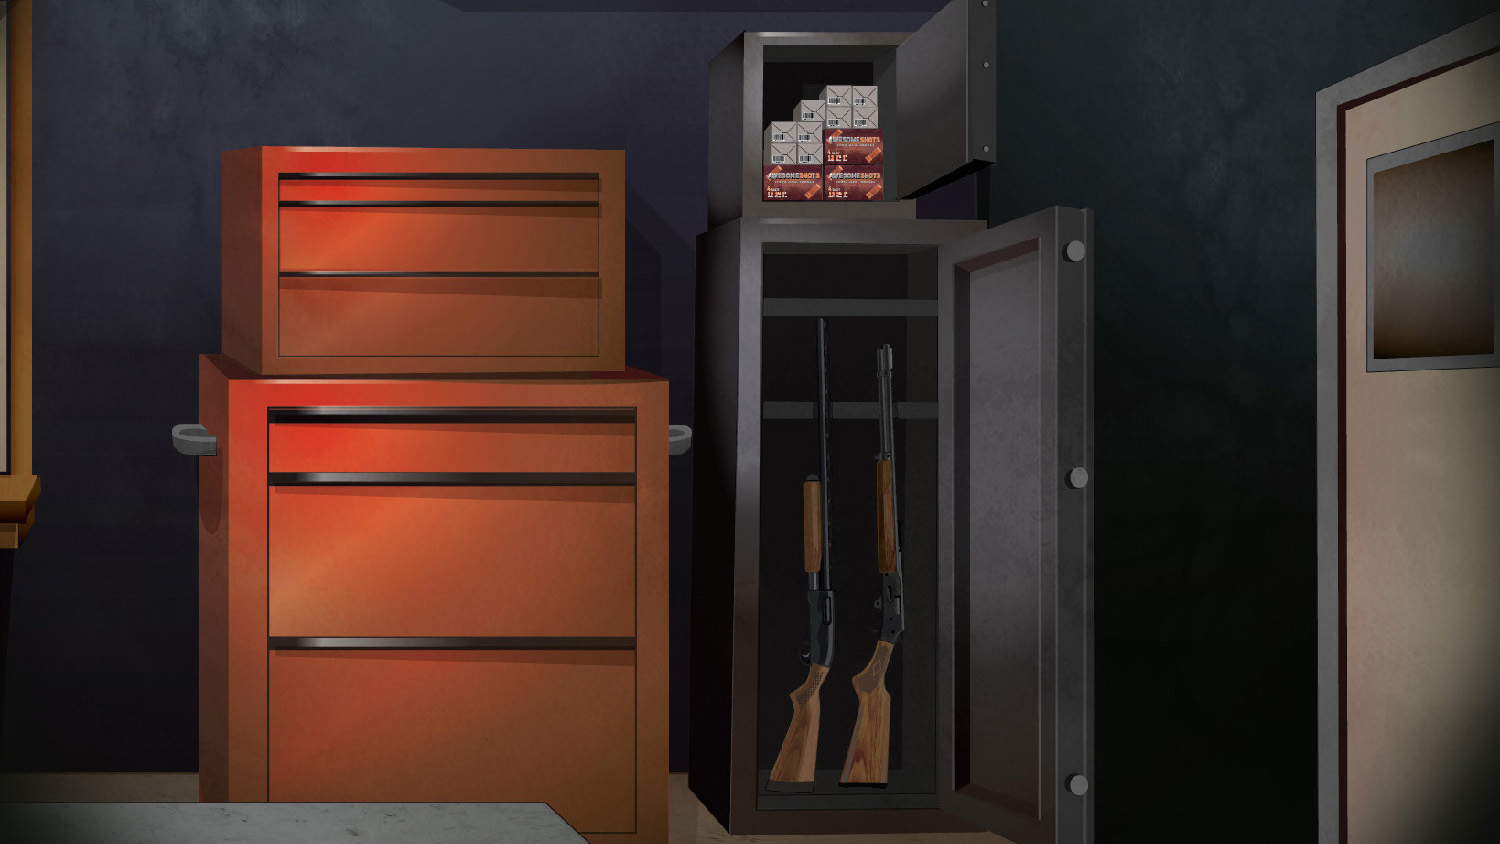 Illustration of firearms and ammunition in their own safes in a garage.